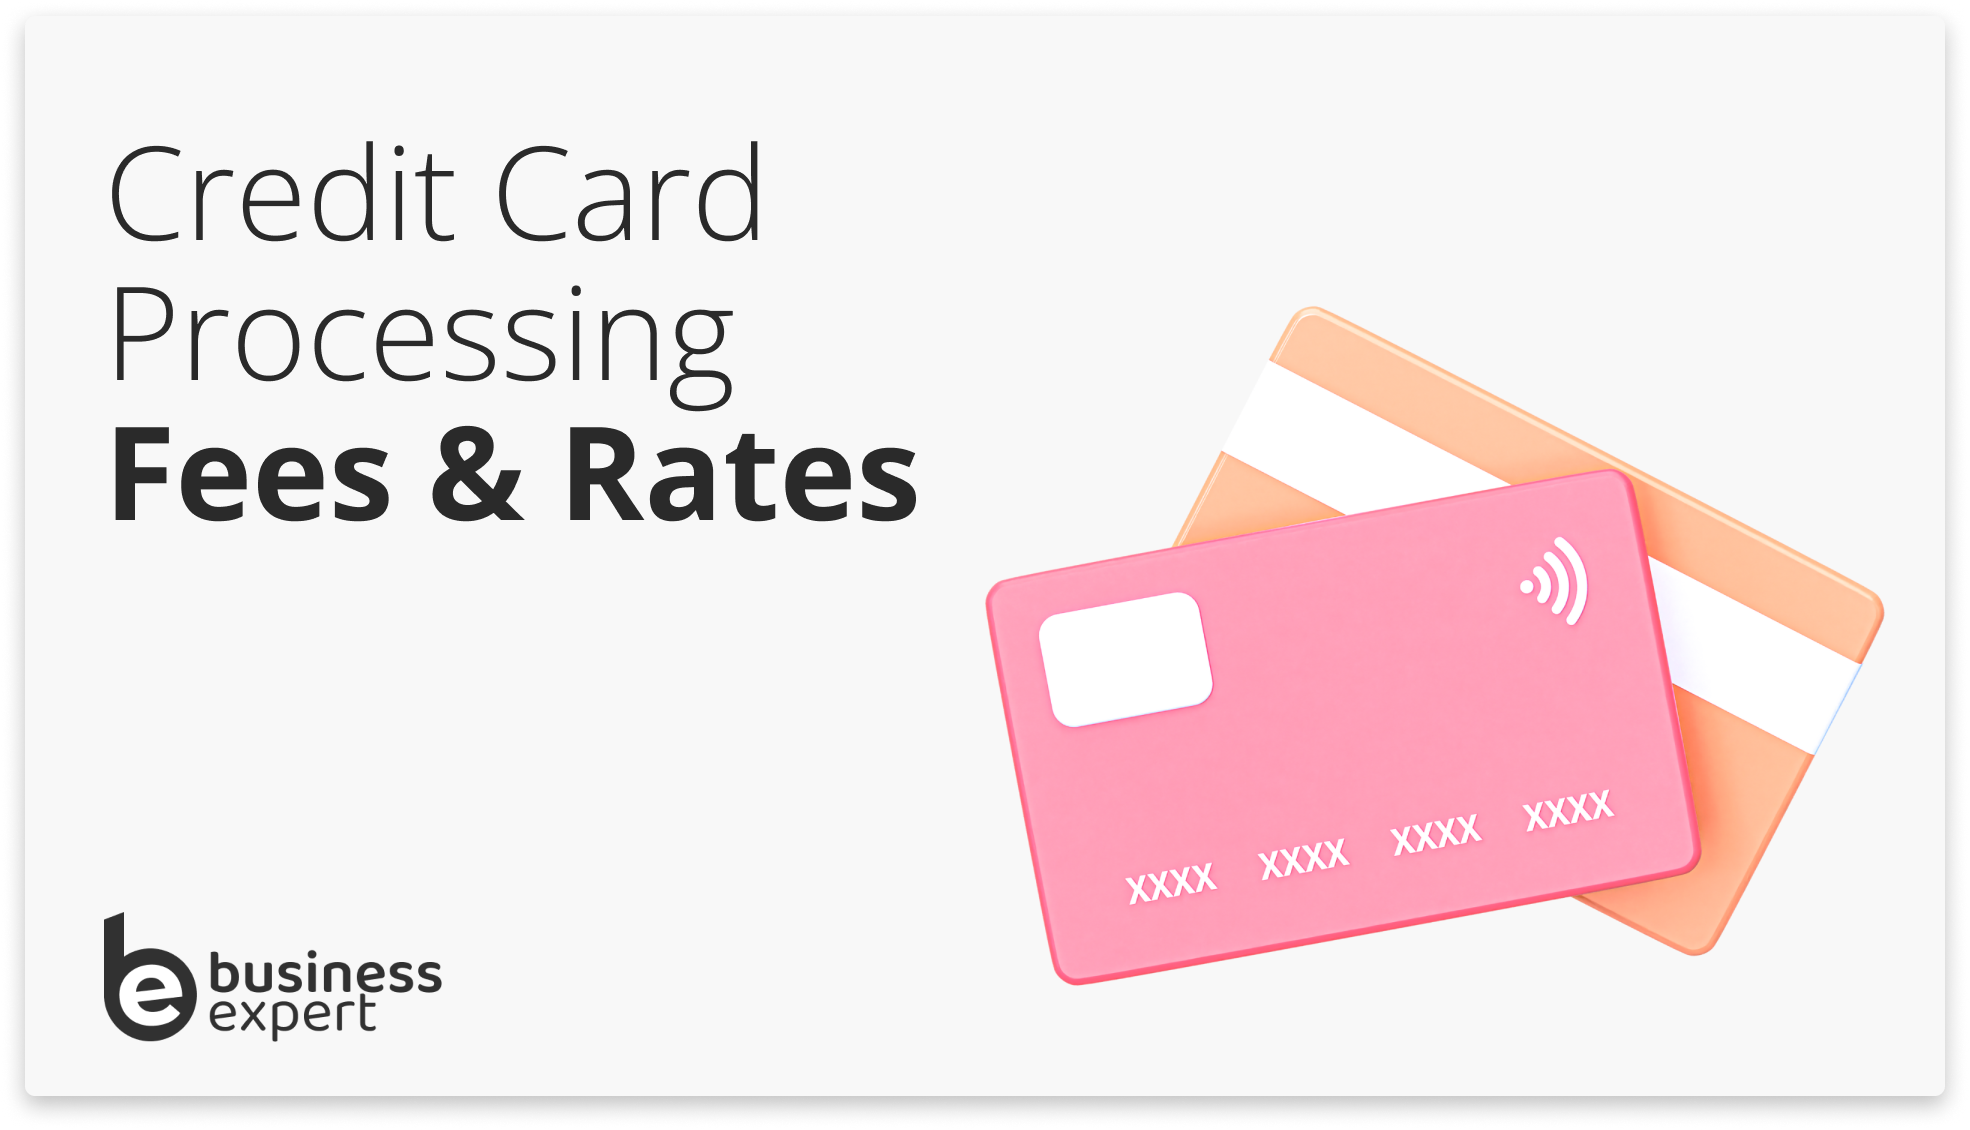 Credit Card Processing Fees & Rates